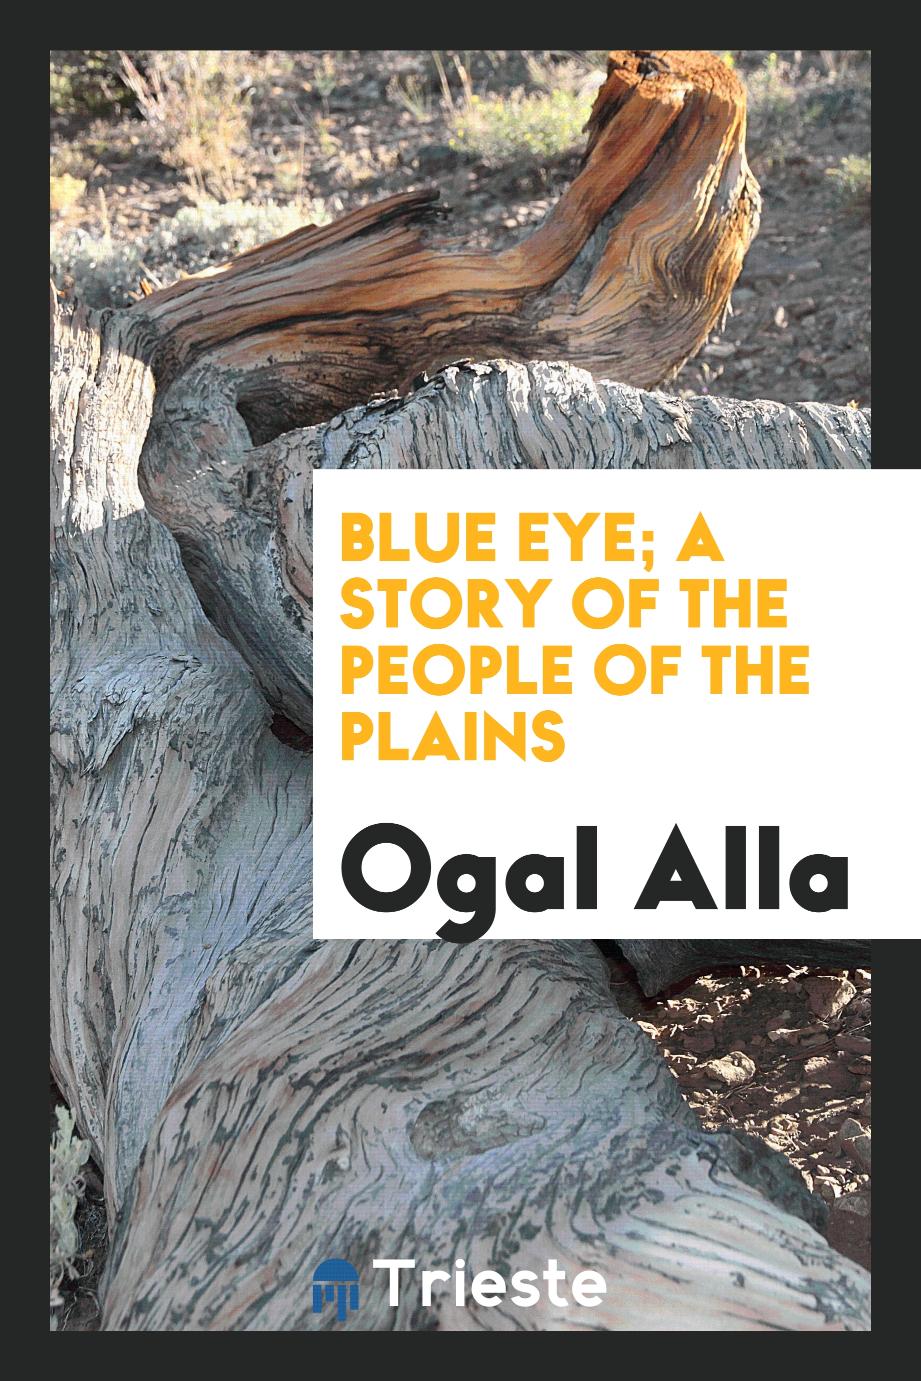 Blue Eye; a story of the people of the plains